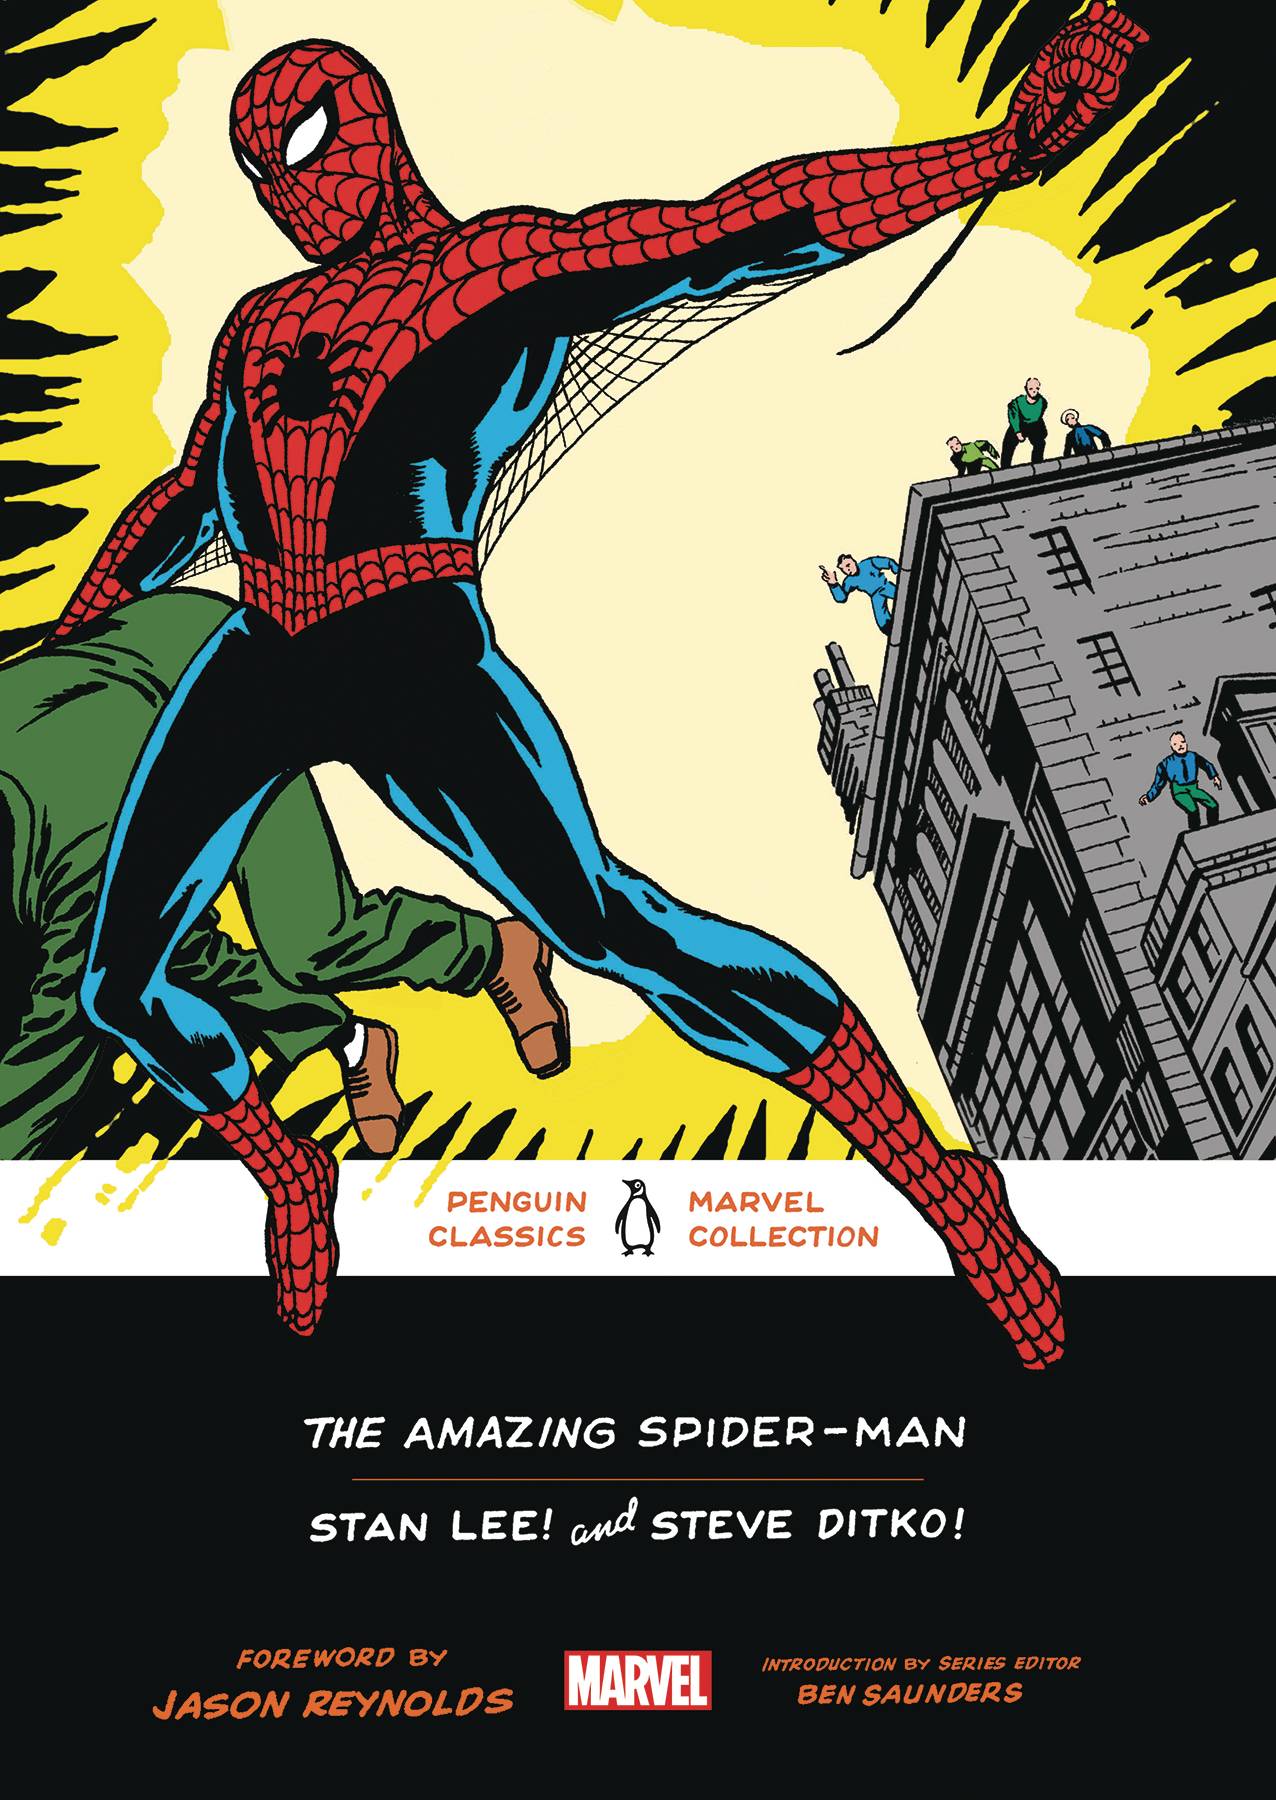 Penguin Classics Marvel Collection The Amazing Spider-Man